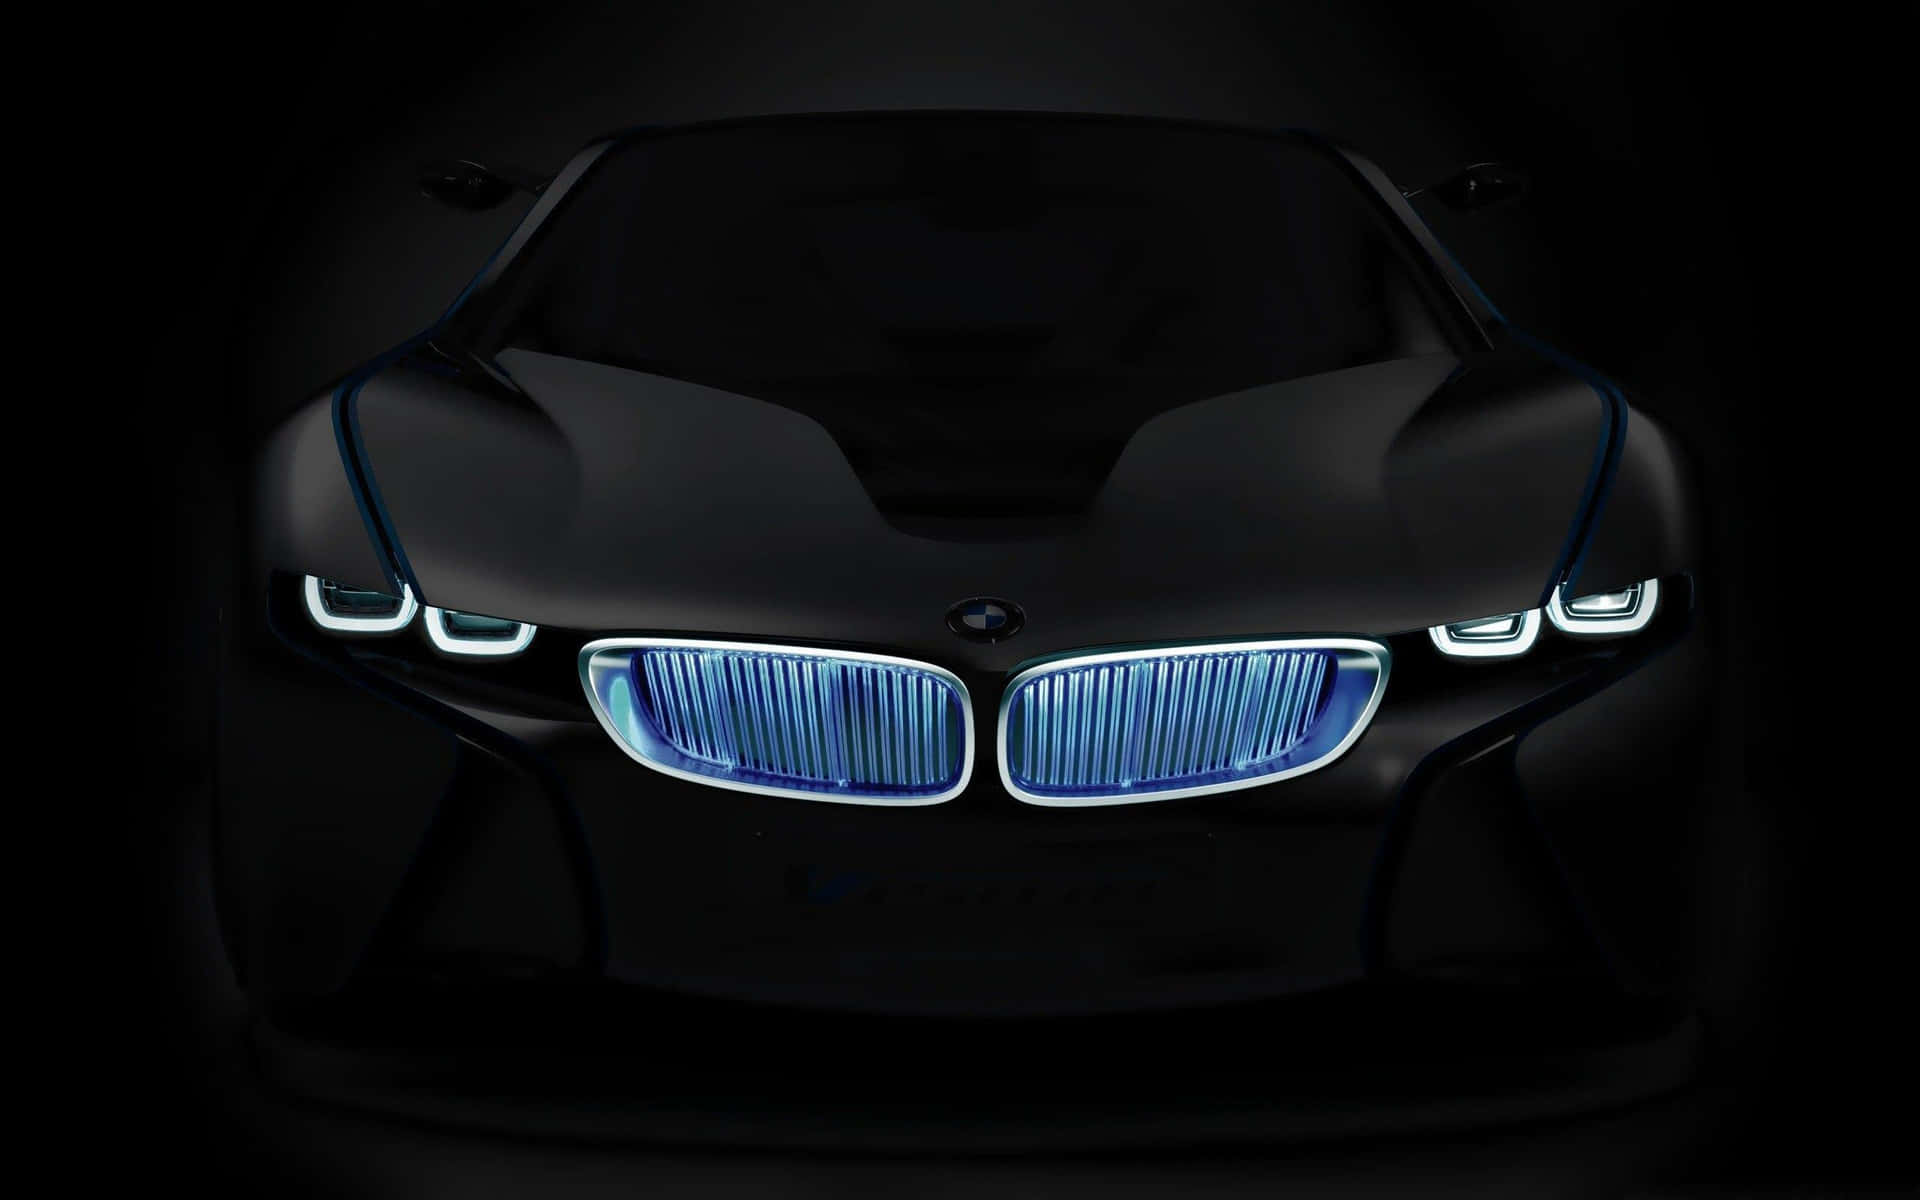 Bmw I8 Concept Car In Black And White Wallpaper